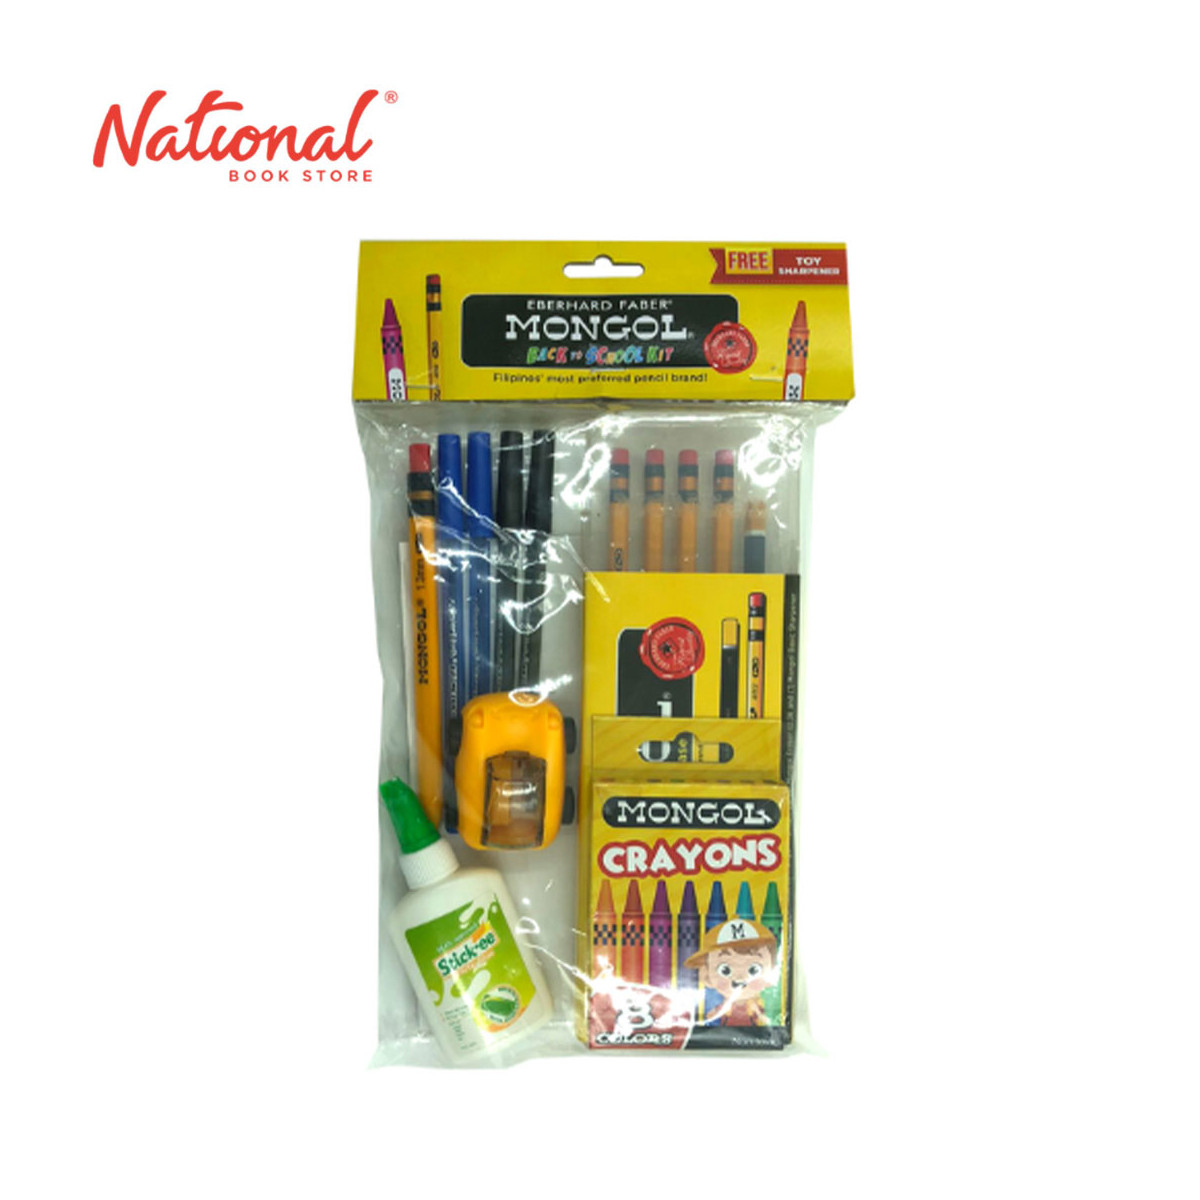 Mongol Back-to-School Kit with Free Toy Sharpener - Writing Supplies - School Supplies